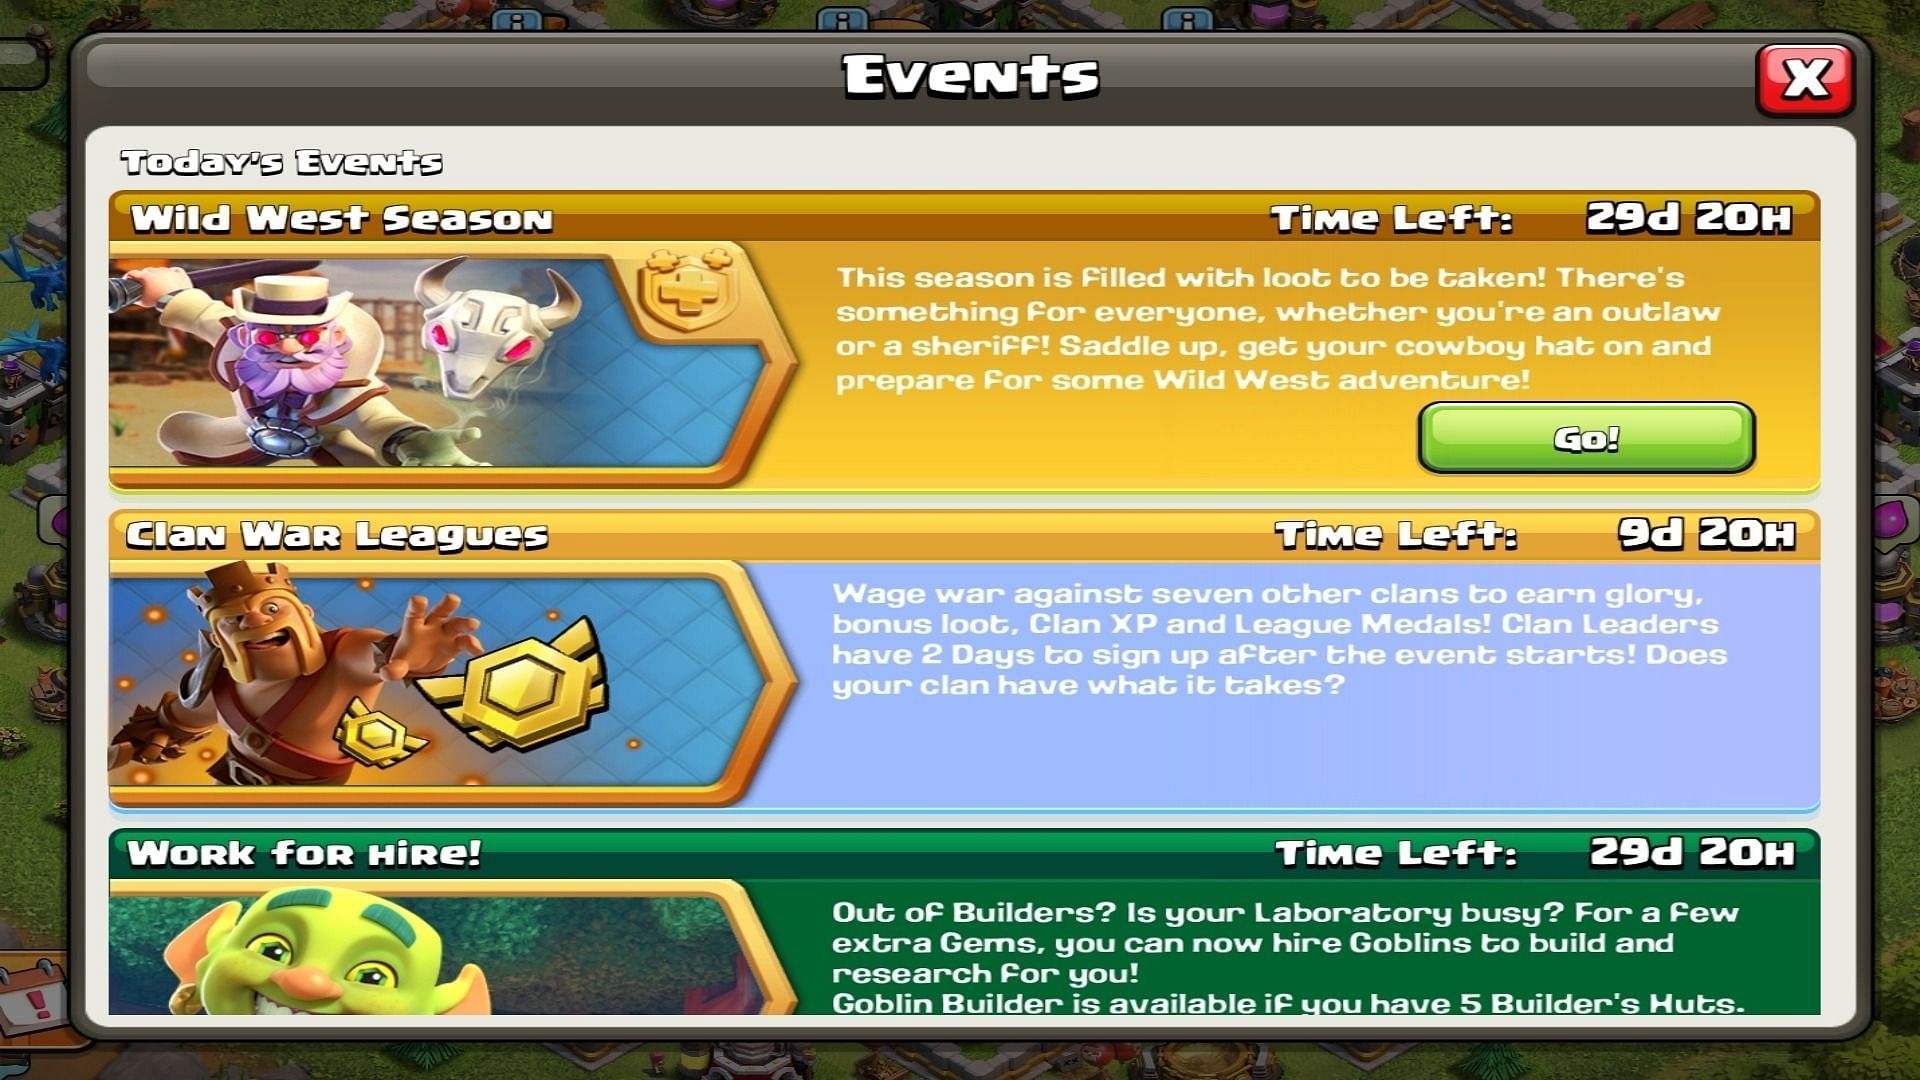 Press on &quot;Go!&quot; under the Wild West Season tab (Image via Supercell)